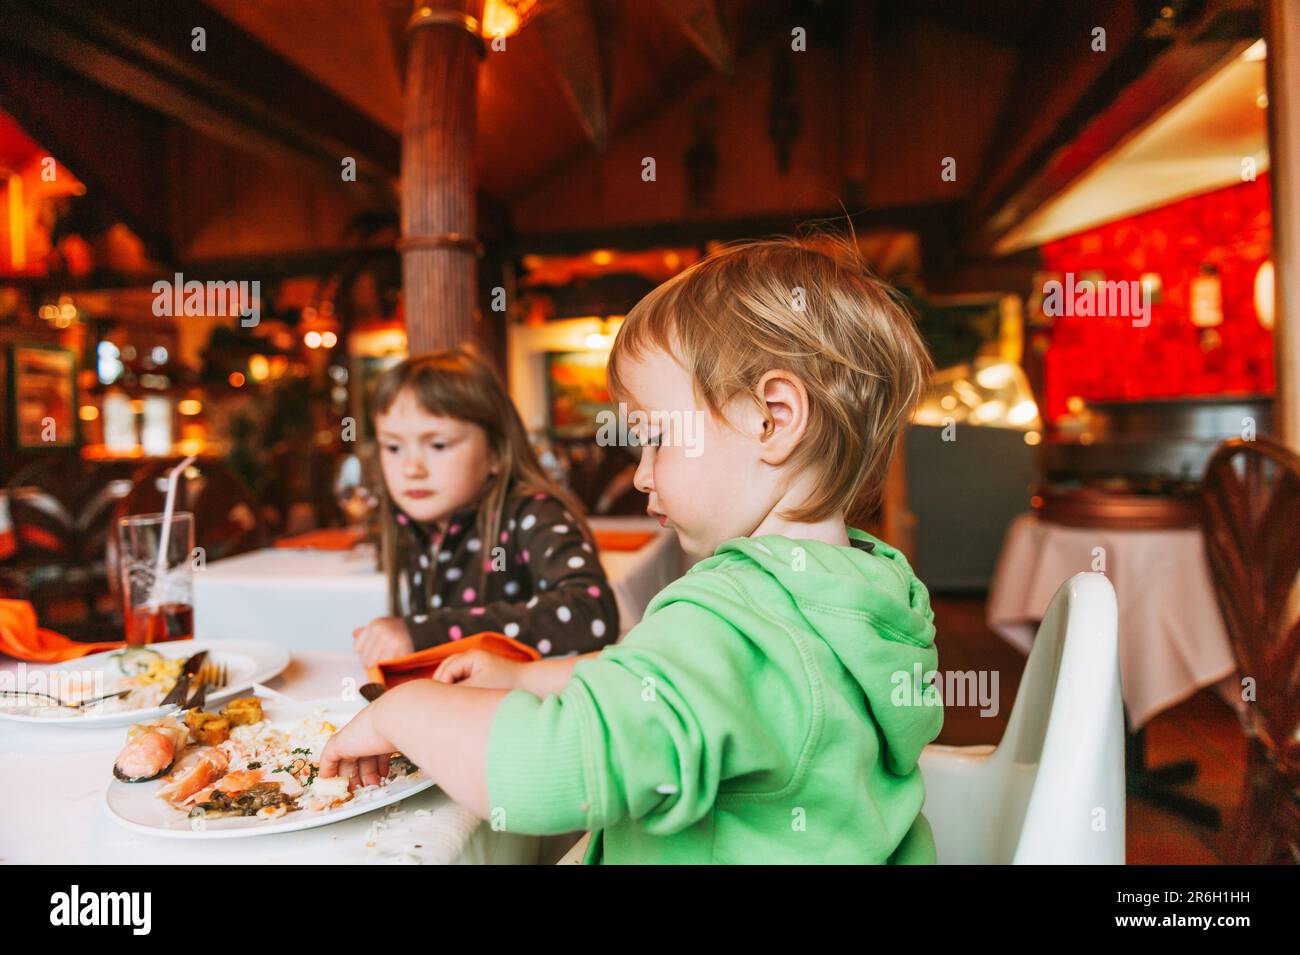 Two messy kids eating lunch in restaurant, toddler eating food with hands Stock Photo